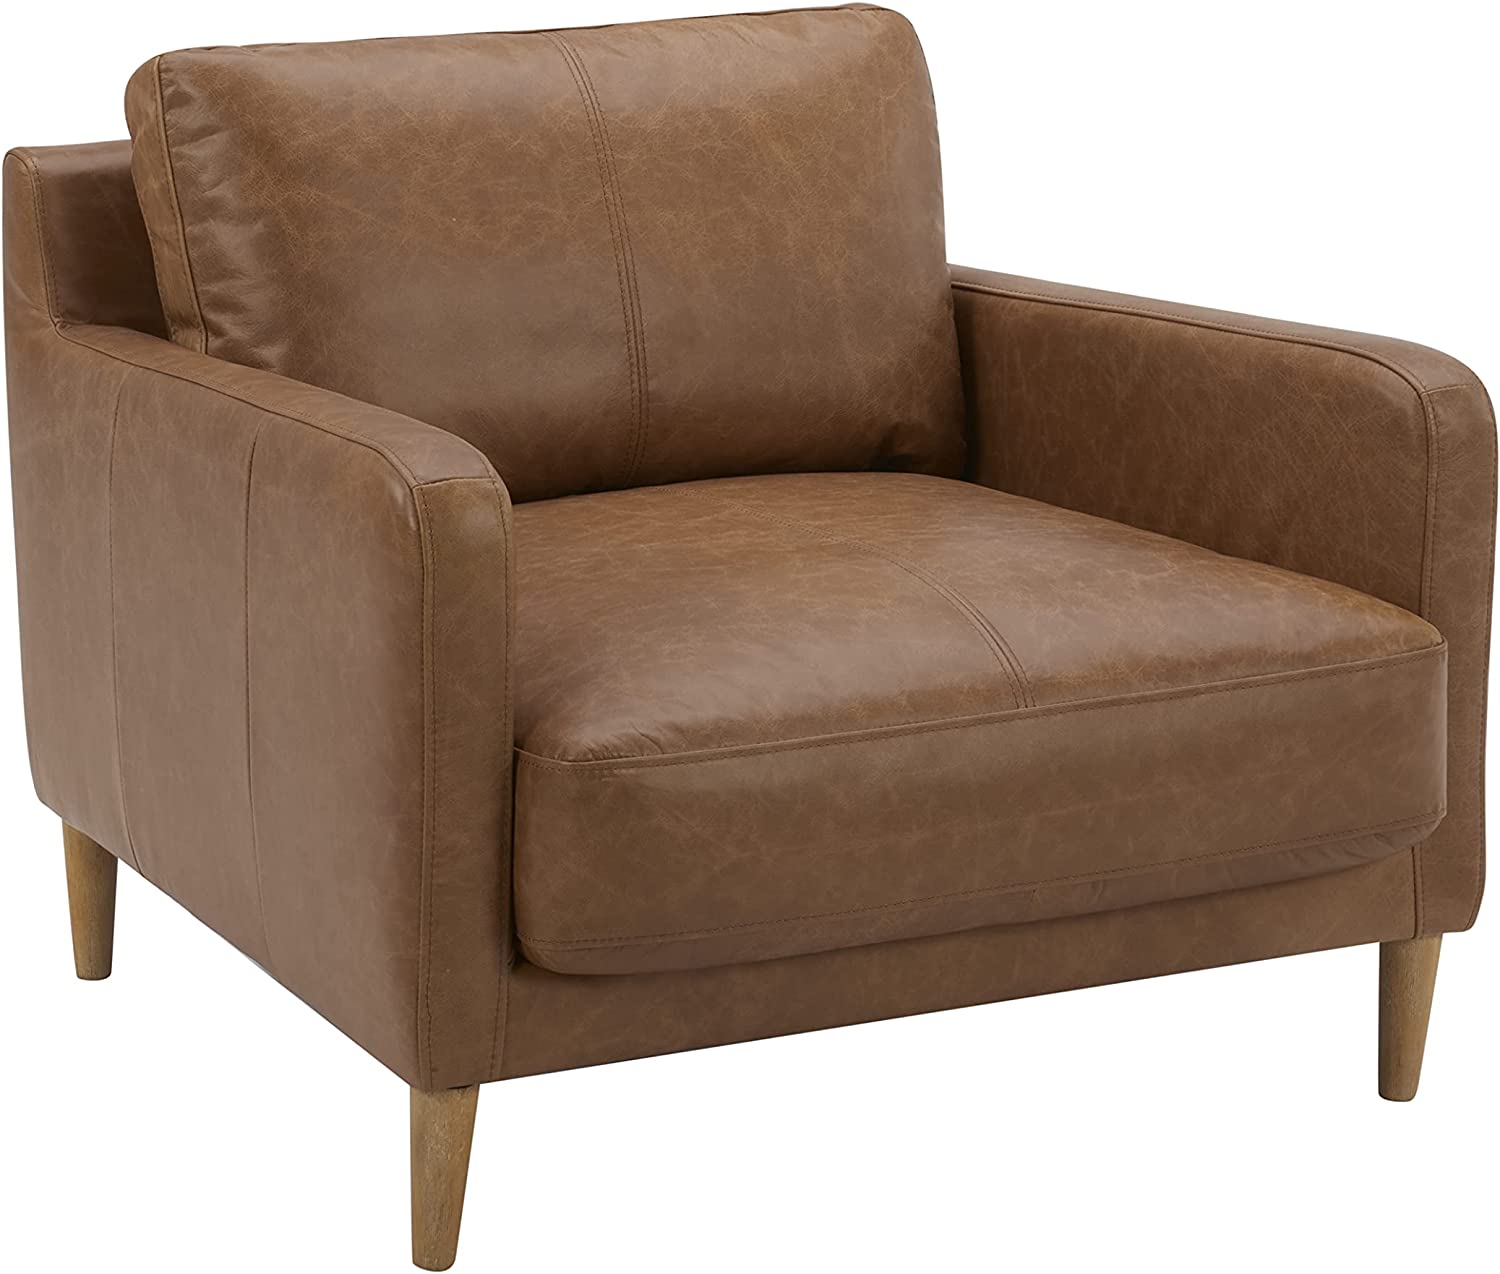 Rivet Modern Deep Leather Living Room Accent Chair-$390